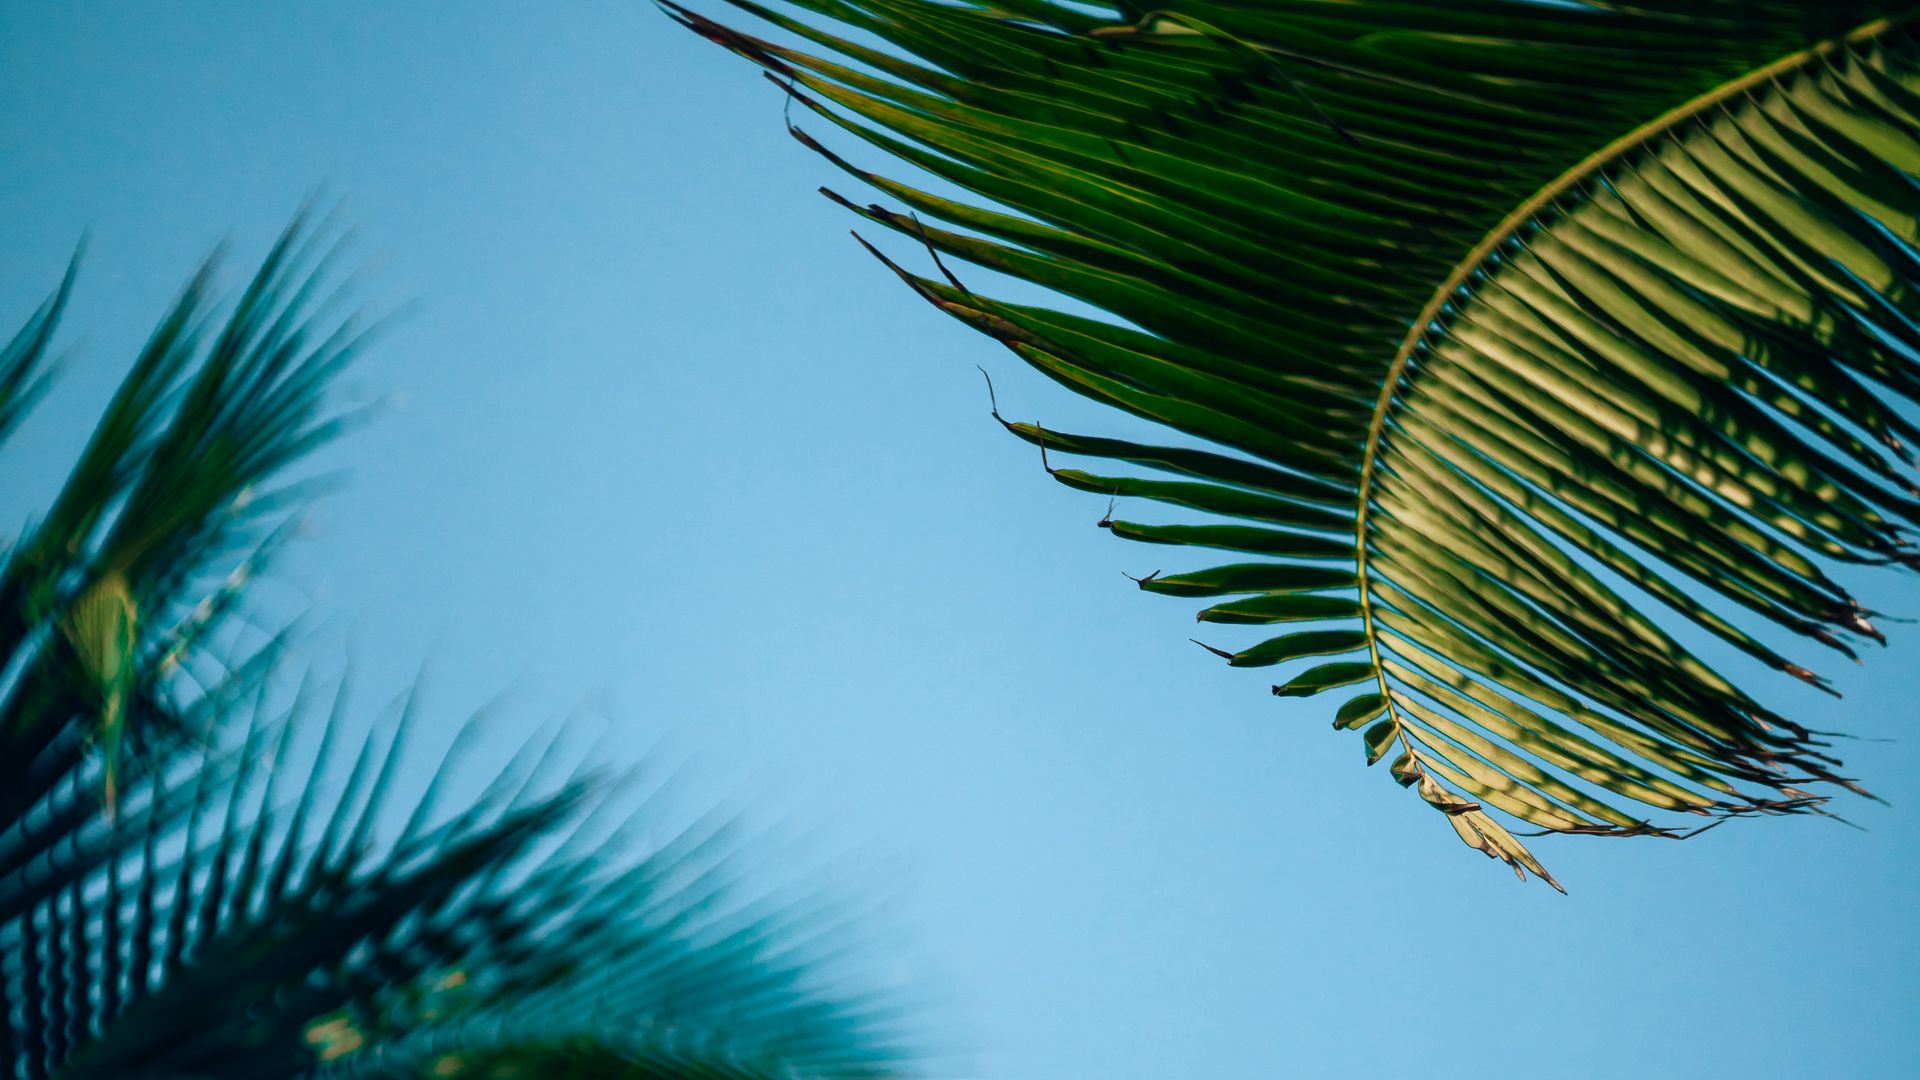 Download wallpaper 1920x1080 palm trees, branch, leaves, bottom view ...